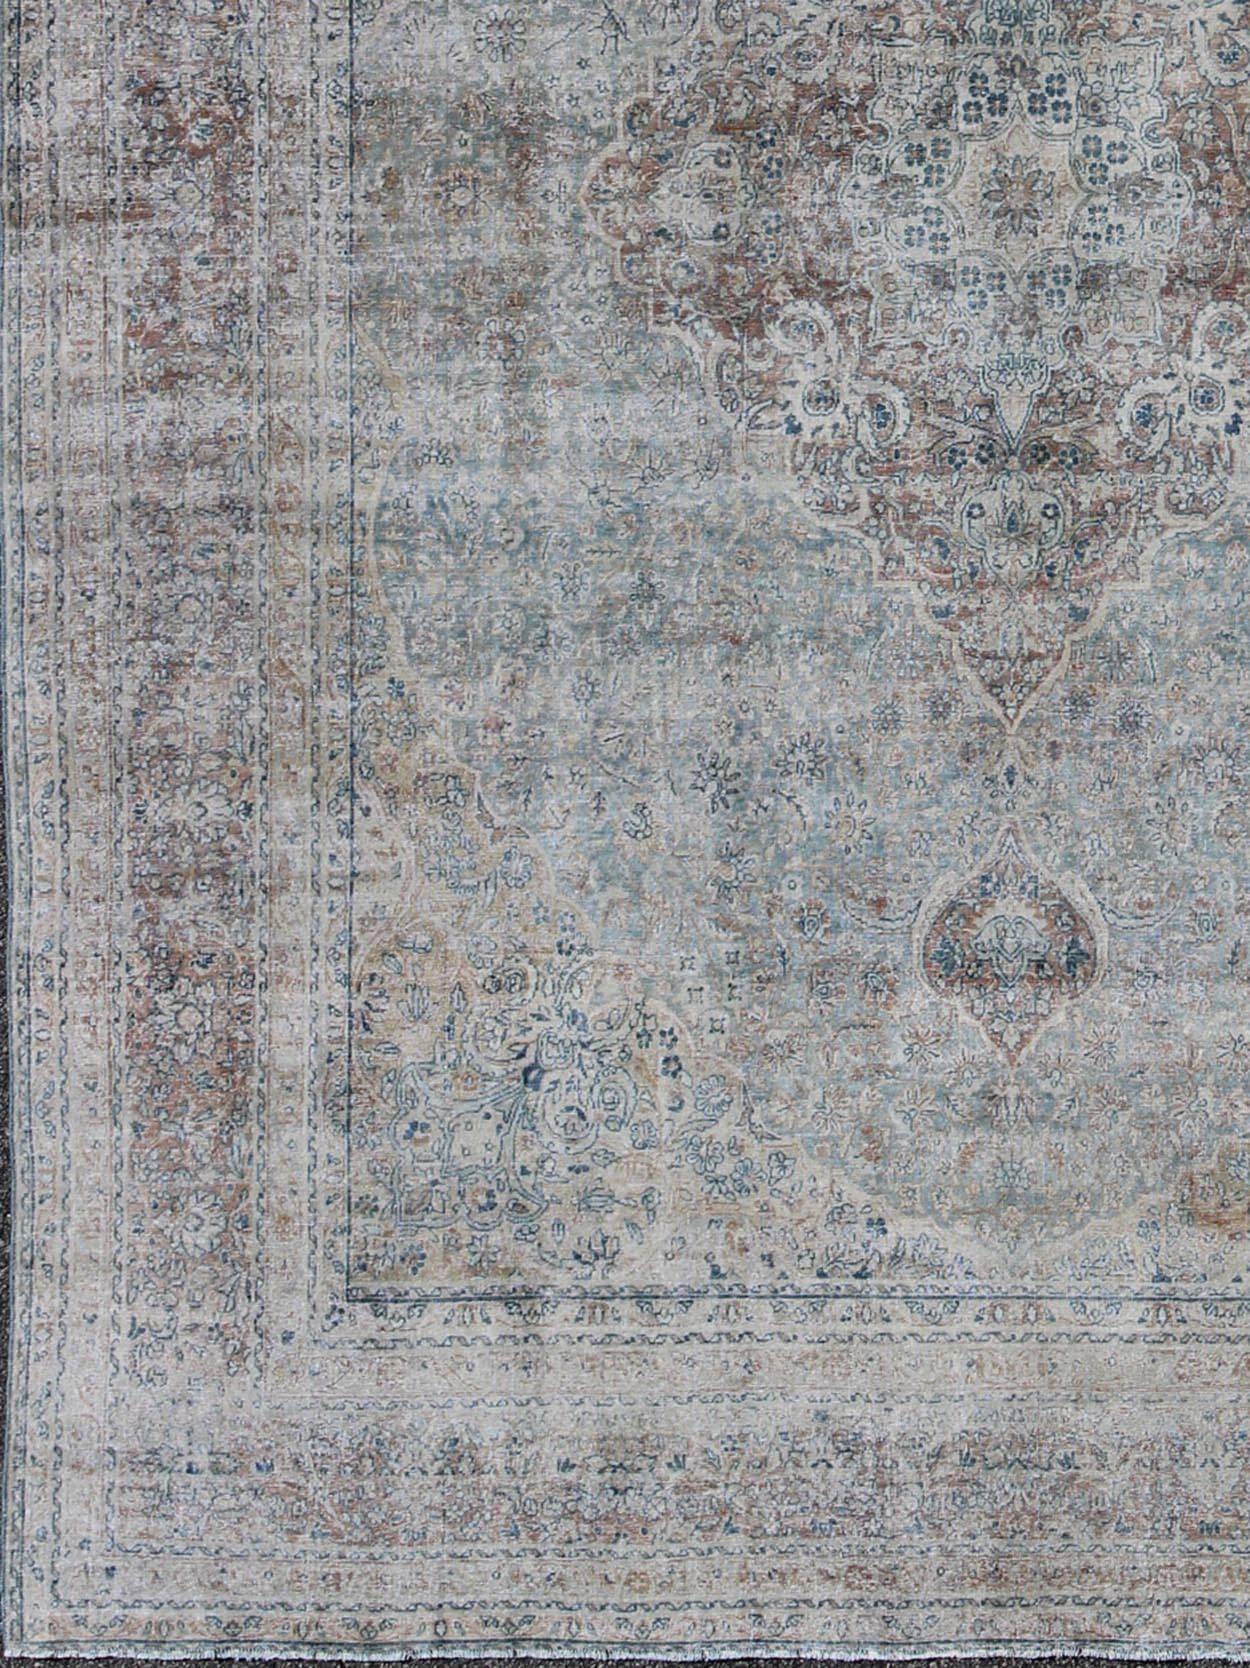 Faded antique Persian Tabriz rug with medallion design in grayish blue, ema-7501, country of origin / type: Iran / Tabriz, circa 1910

This antique Persian Tabriz carpet (circa 1910) features both muted and faded colors and a medallion design set